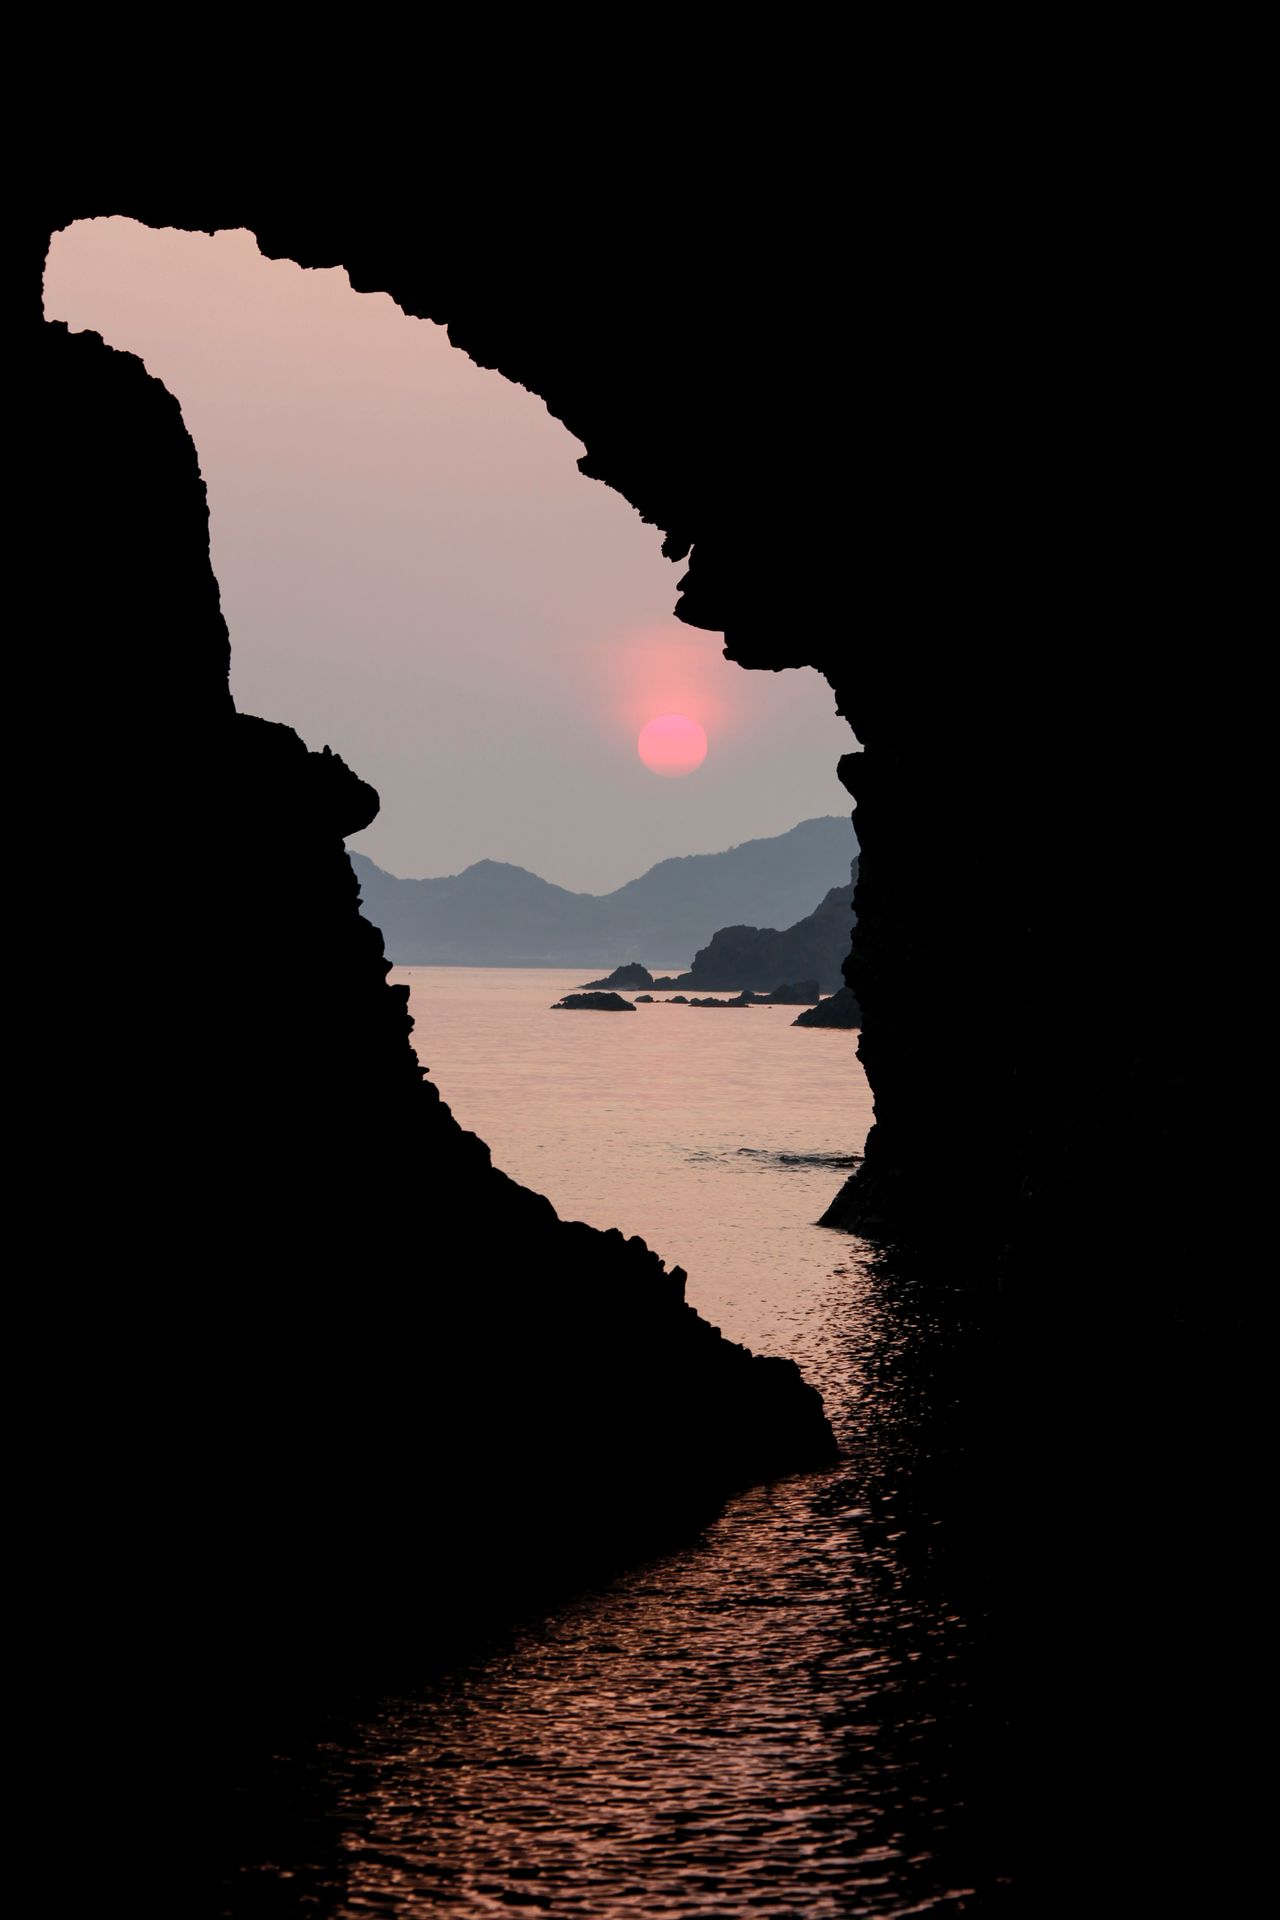 An opening in the cliff face at the Kaka-no-kukedo sea caves, the mythology birthplace of the god Sada-no-ōkami. Designated both a place of scenic beauty and a natural monument, the caves are a favorite spot for visitors viewing the rising sun aboard tour boats. (Courtesy Shimane Prefectural Tourism Federation)